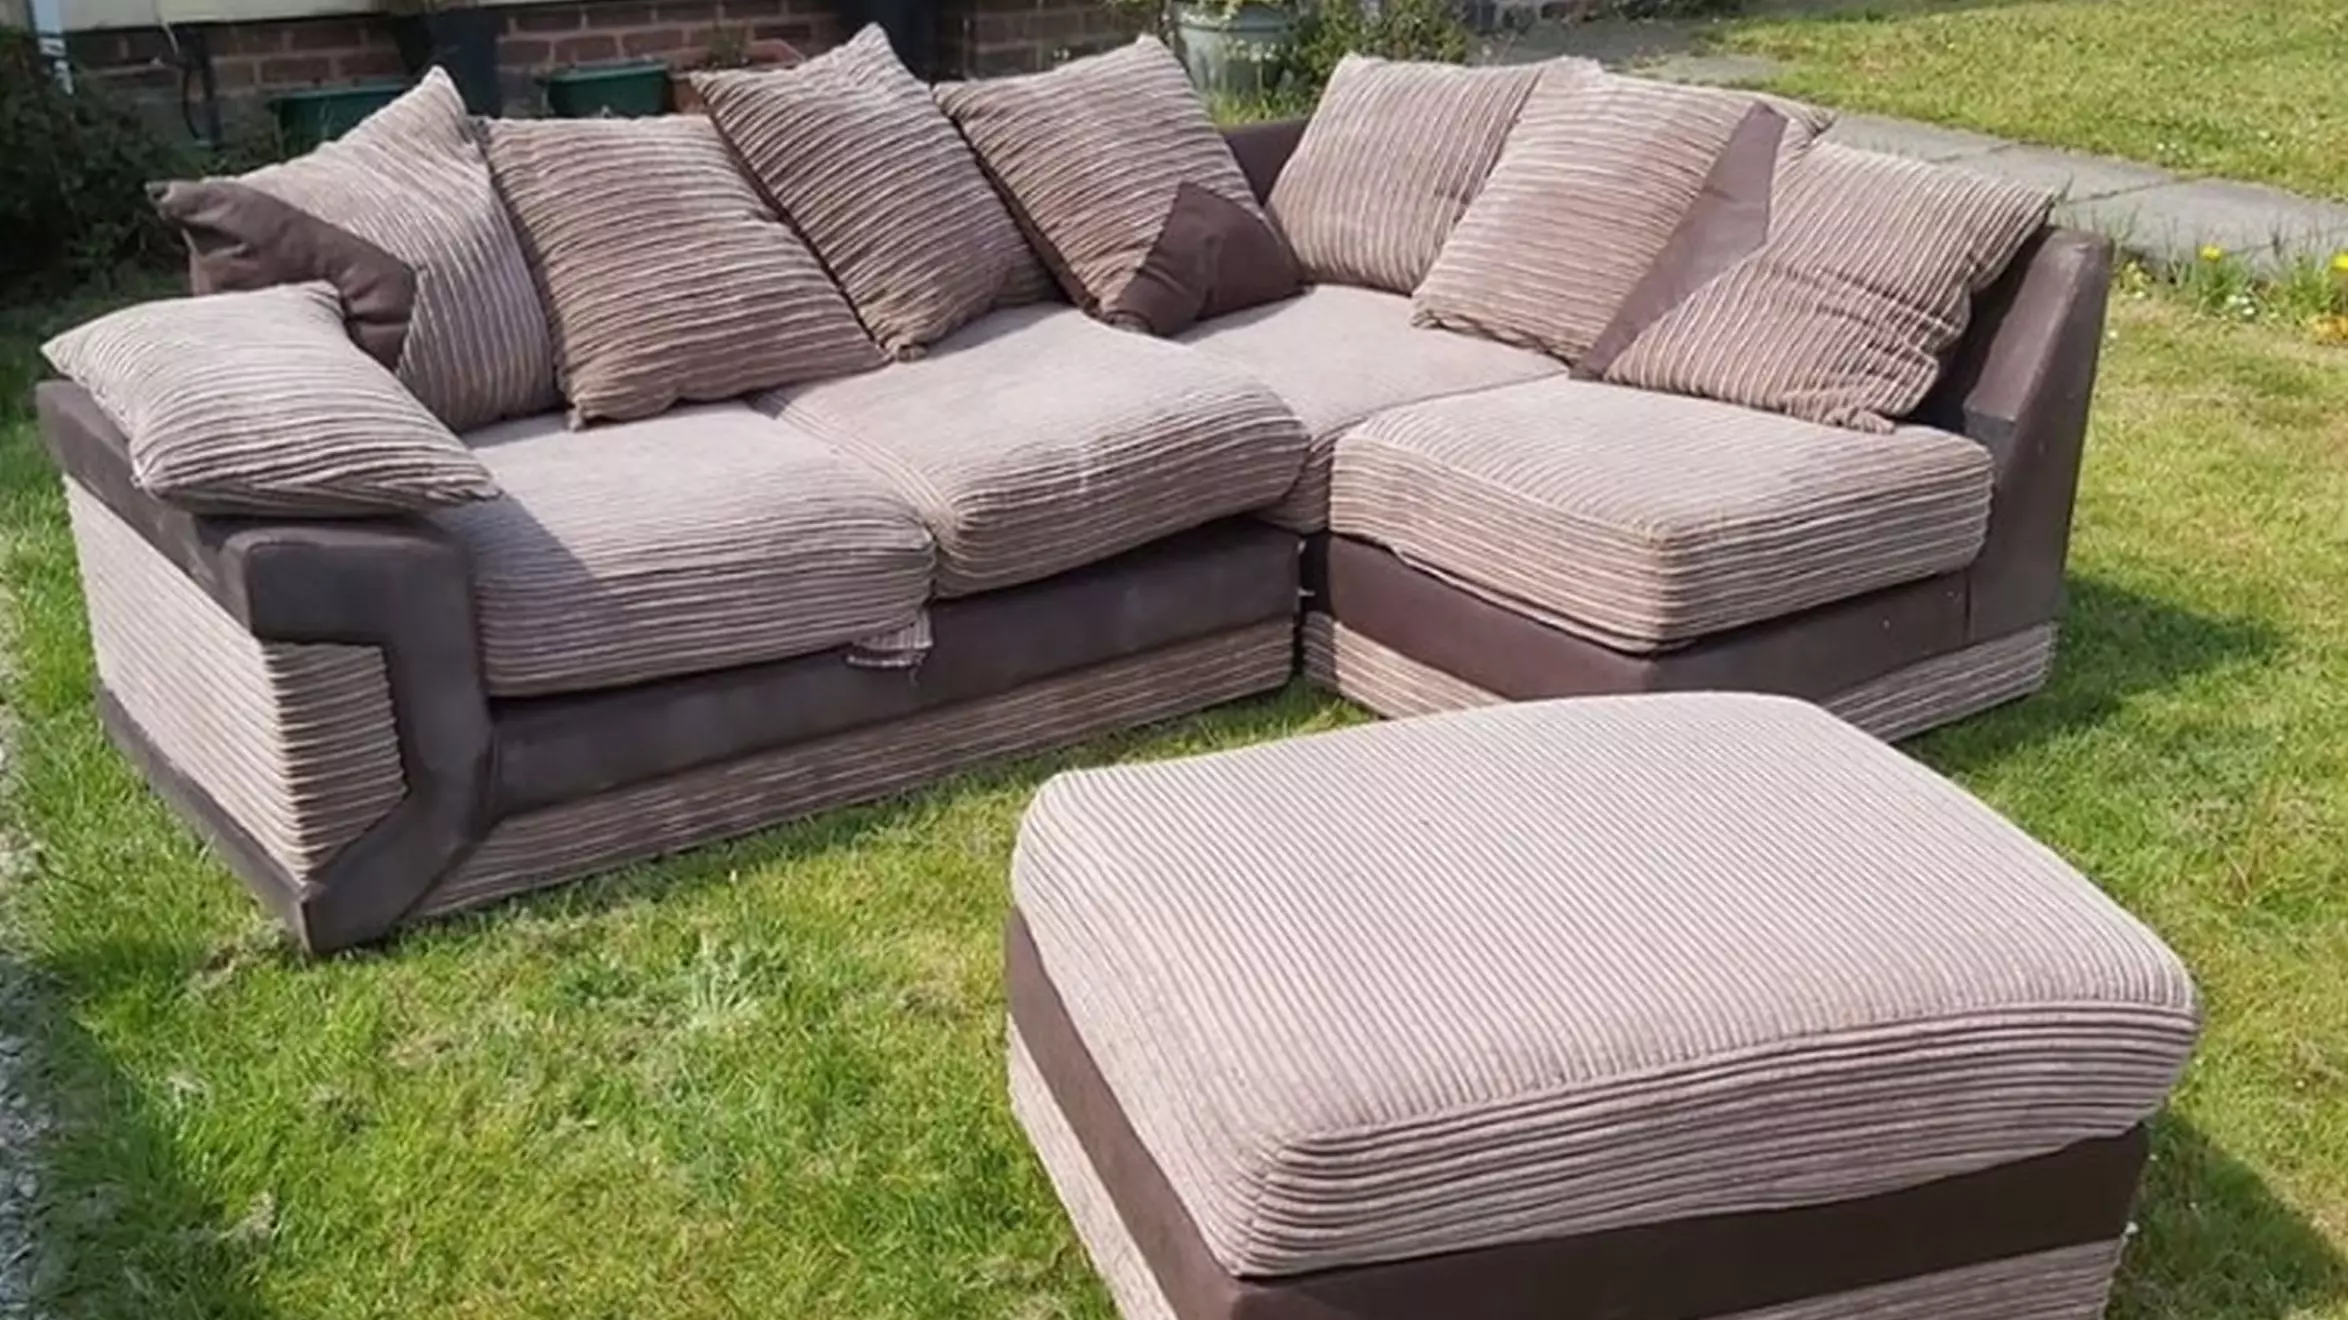 Man Who Sold Free Sofa For £180 Claims He's Made £8,000 From Free Stuff